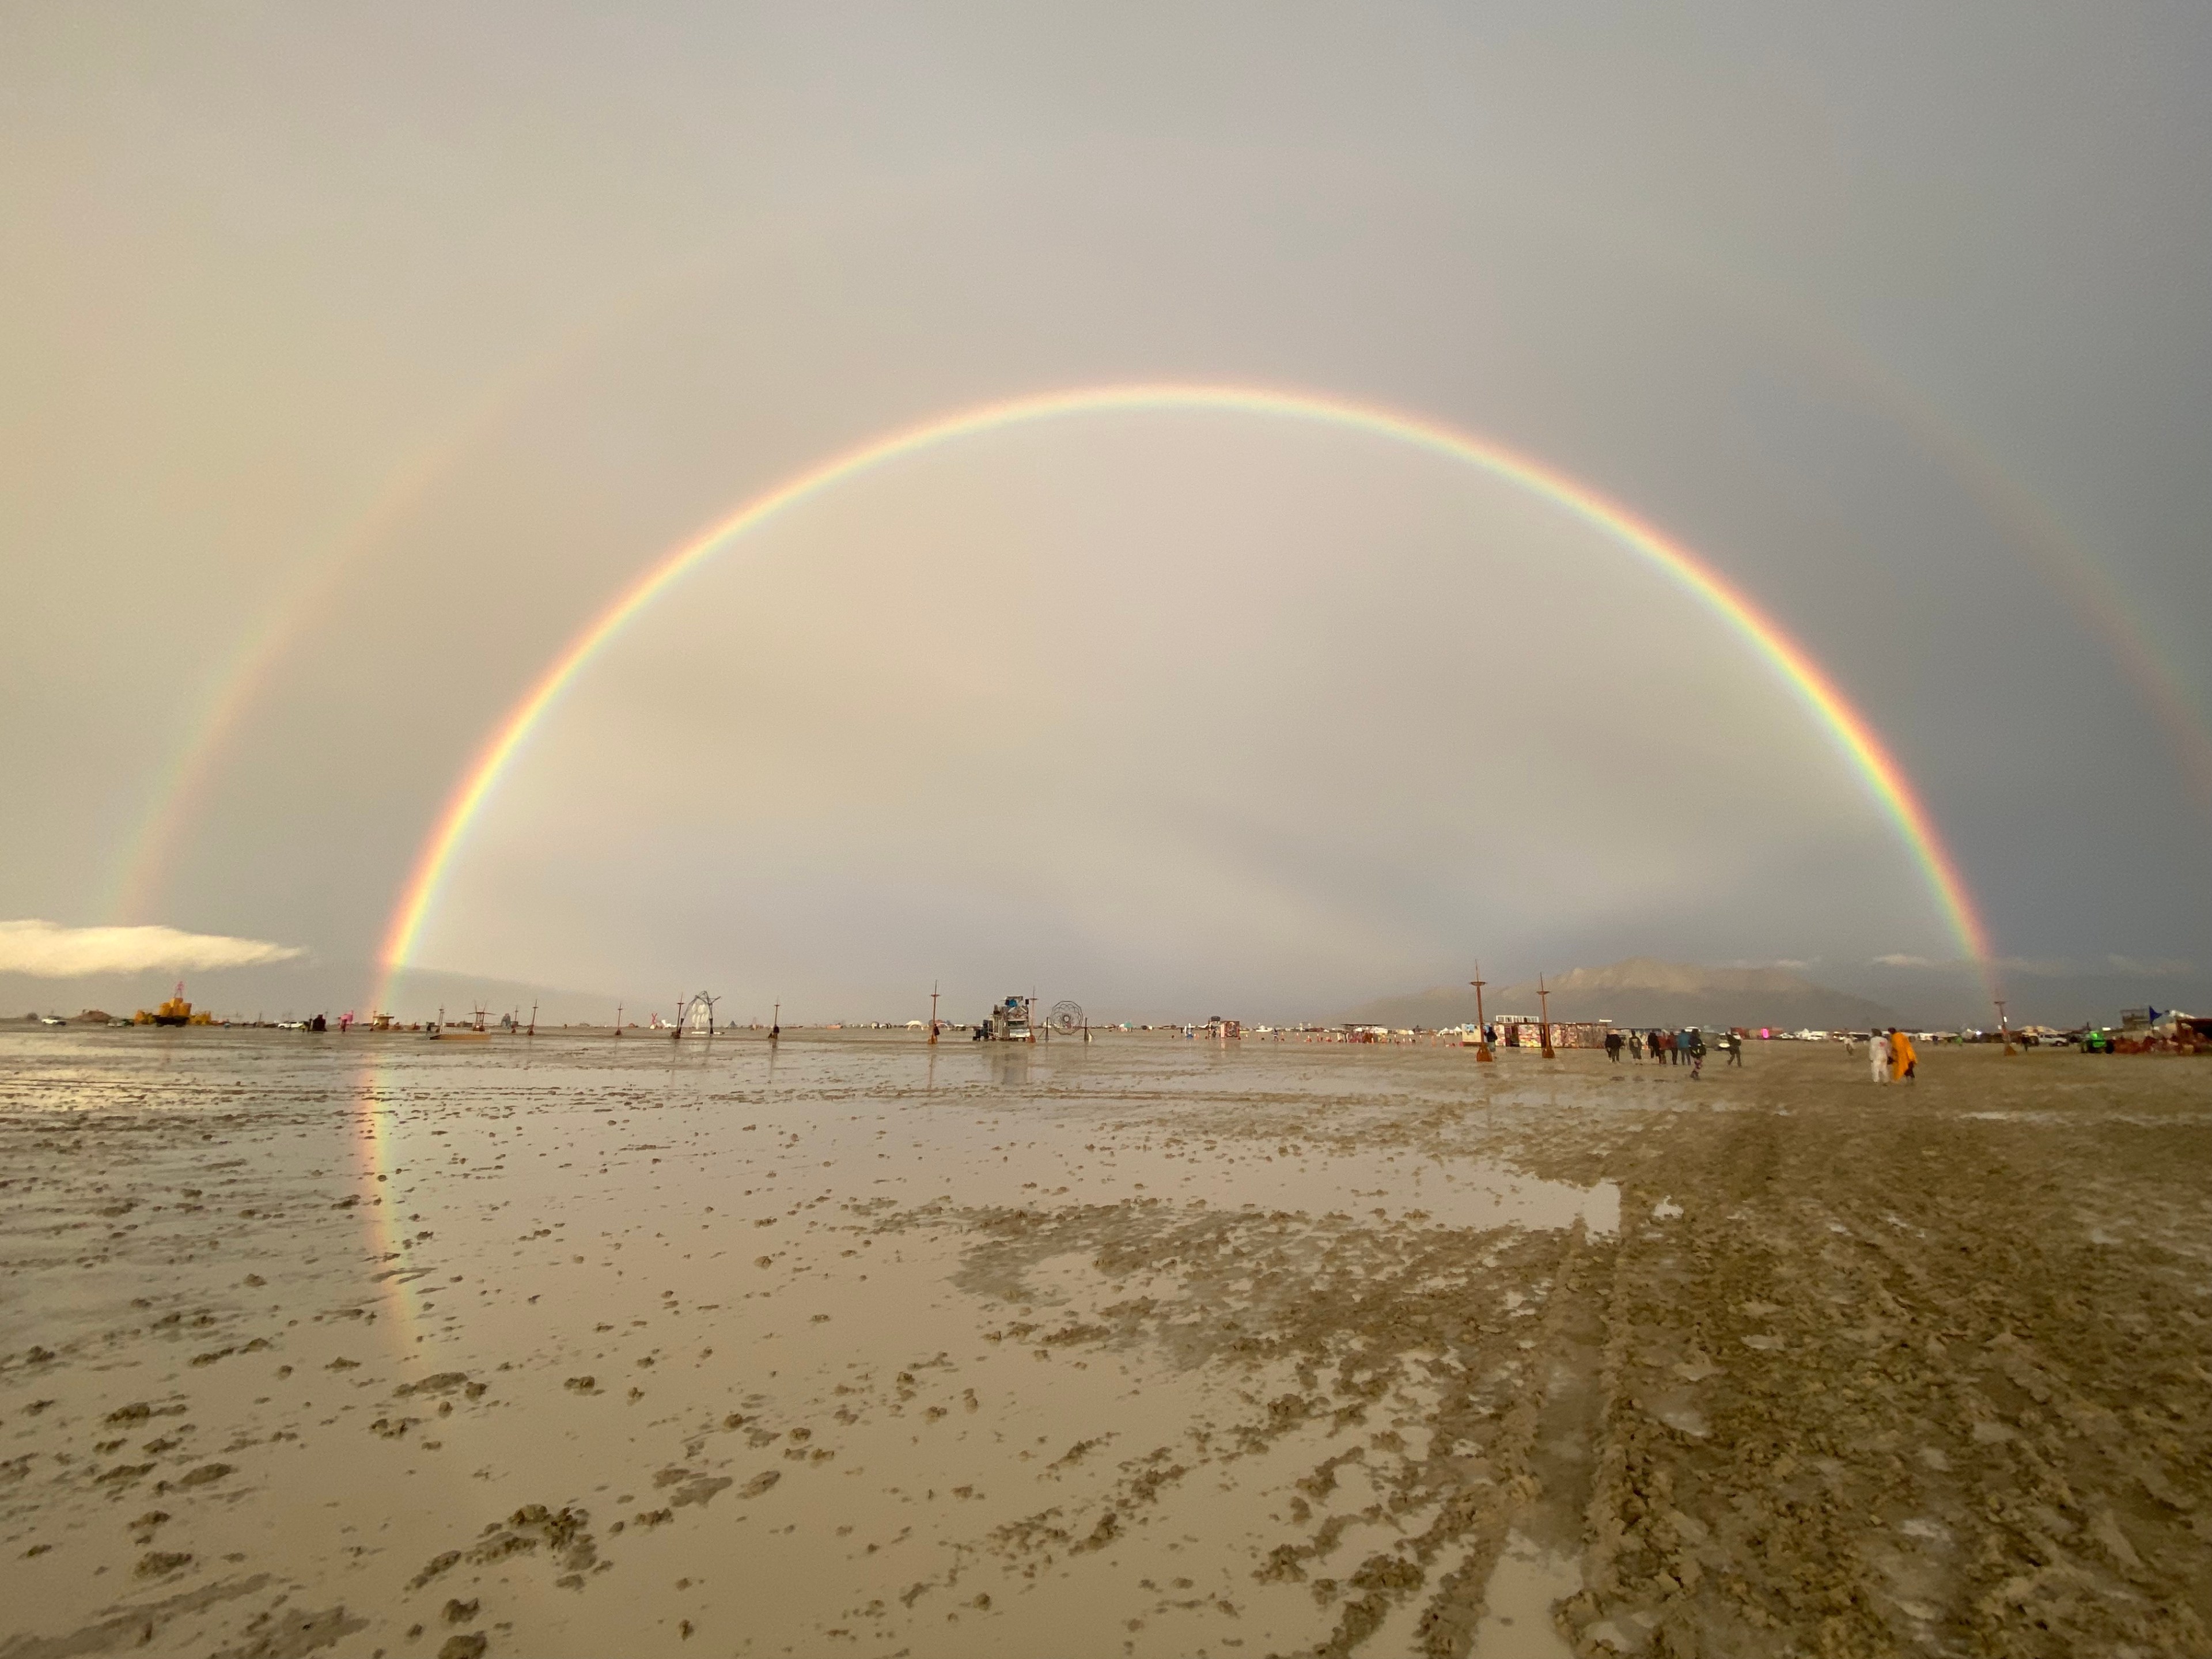 A double rainbow arches over a wet, muddy landscape with scattered people and structures.